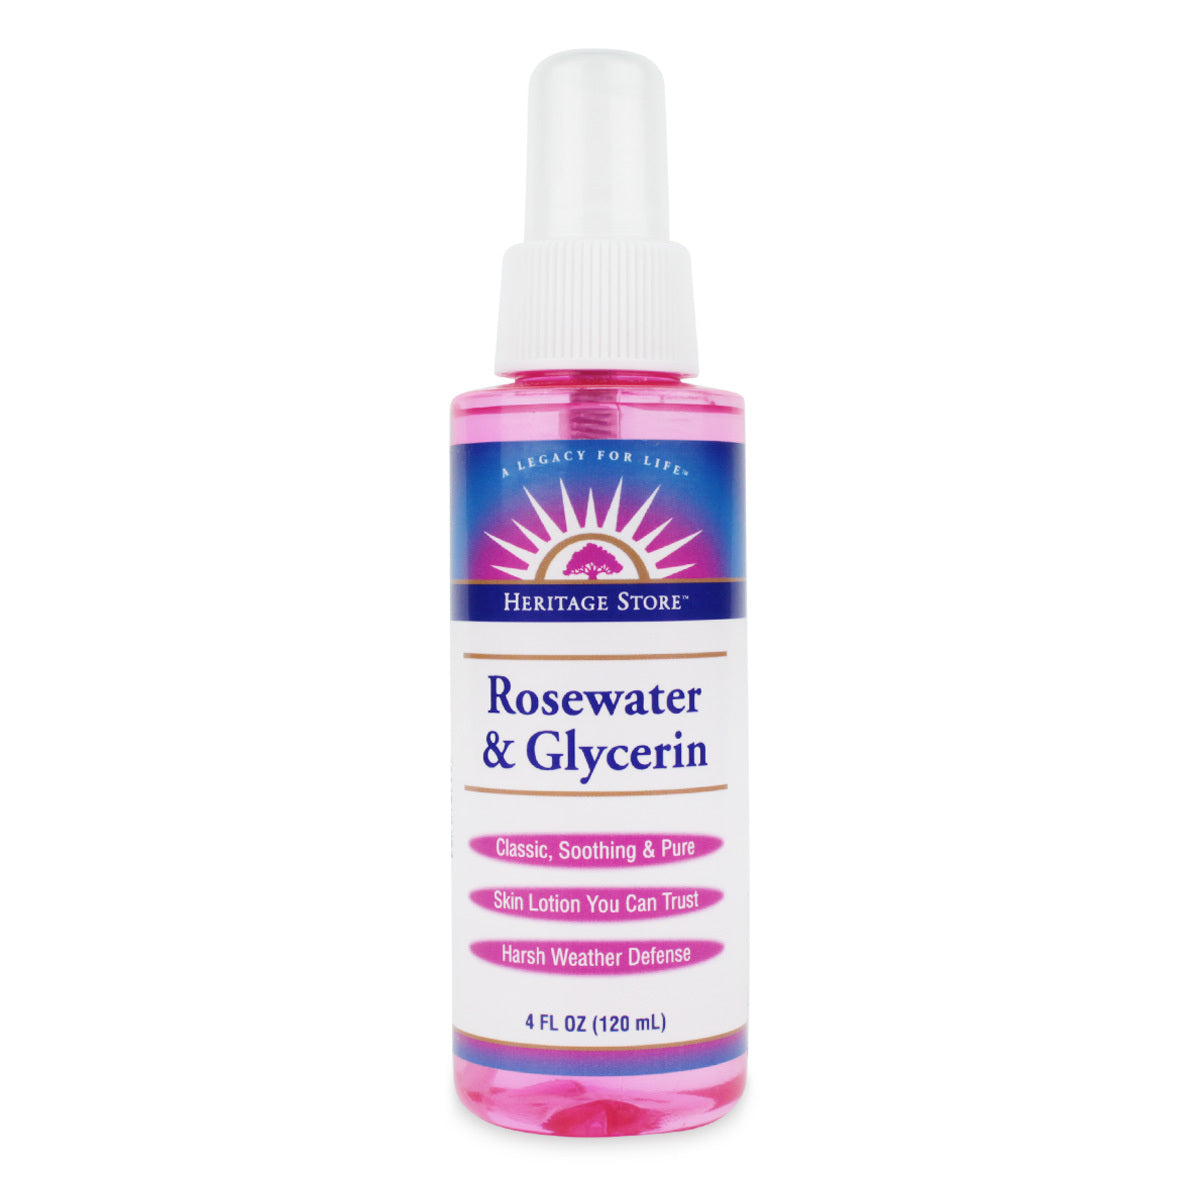 Primary image of Rosewater & Glycerin in Pump Spray